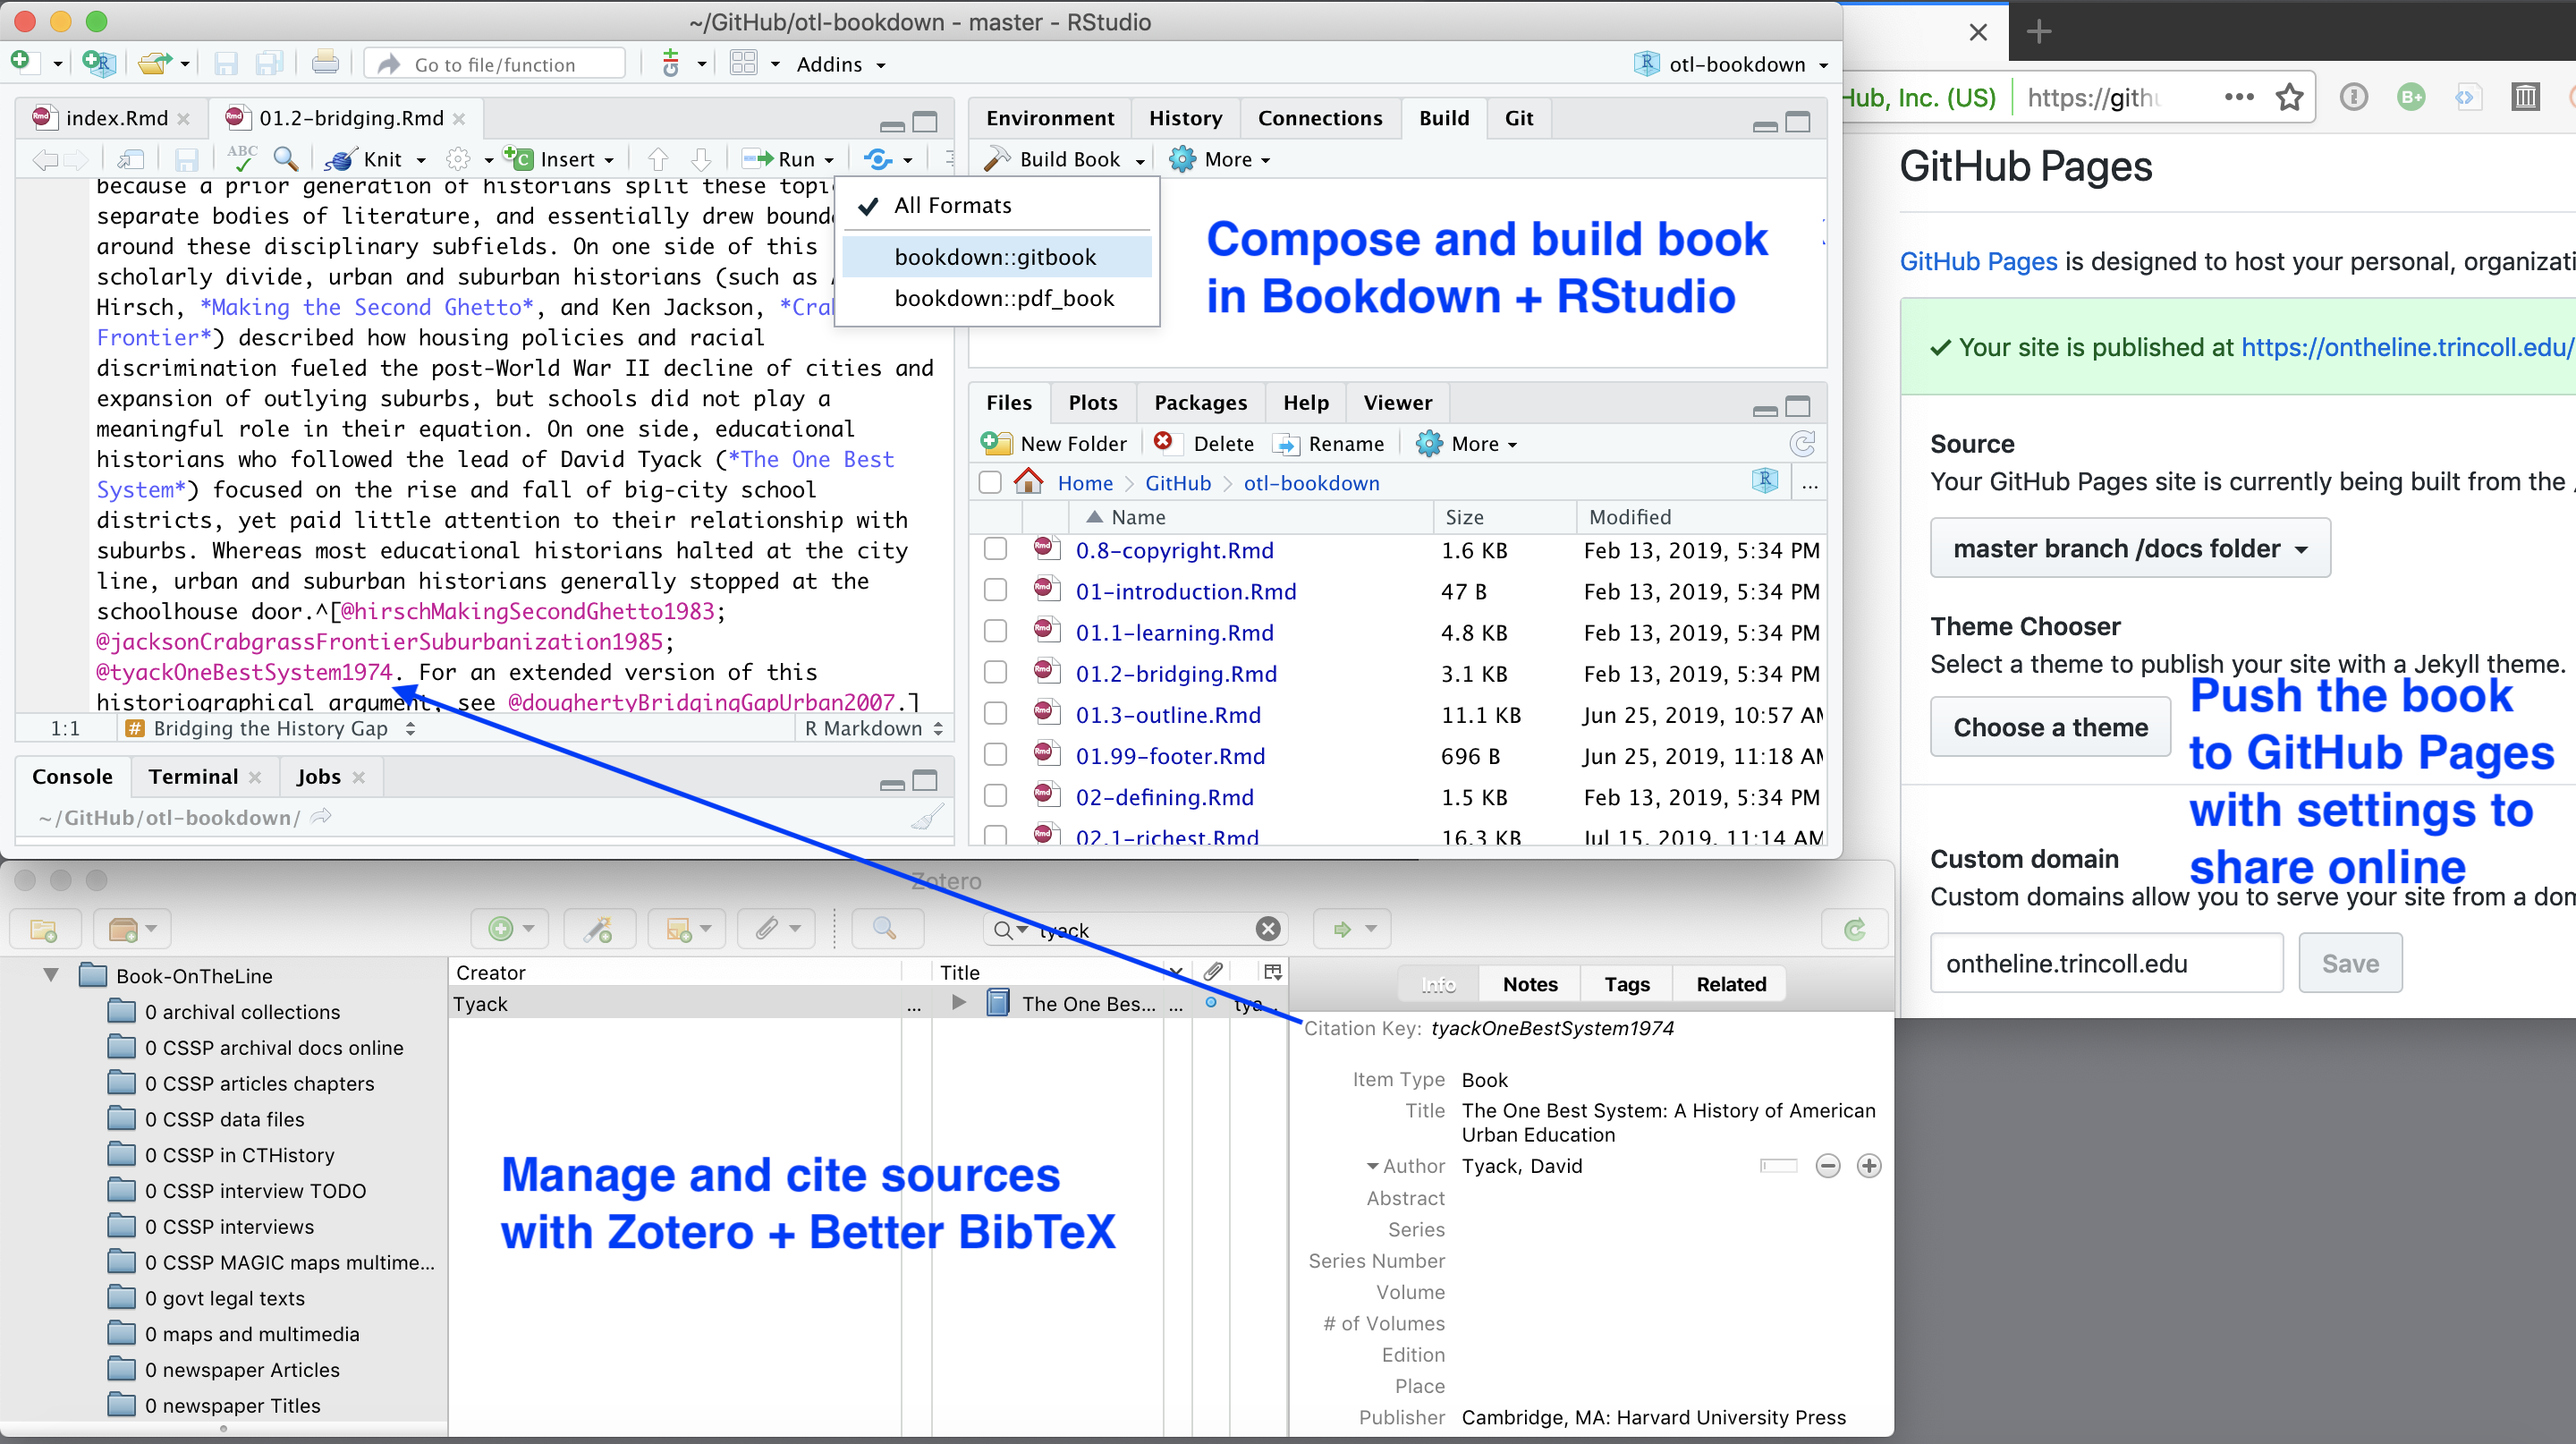 Workflow on a Mac desktop: Compose the text in RStudio and build books with Bookdown (top left), manage sources and insert citation keys with Zotero + BetterBibTex (bottom left), push book products to your GitHub repository to host online (right).